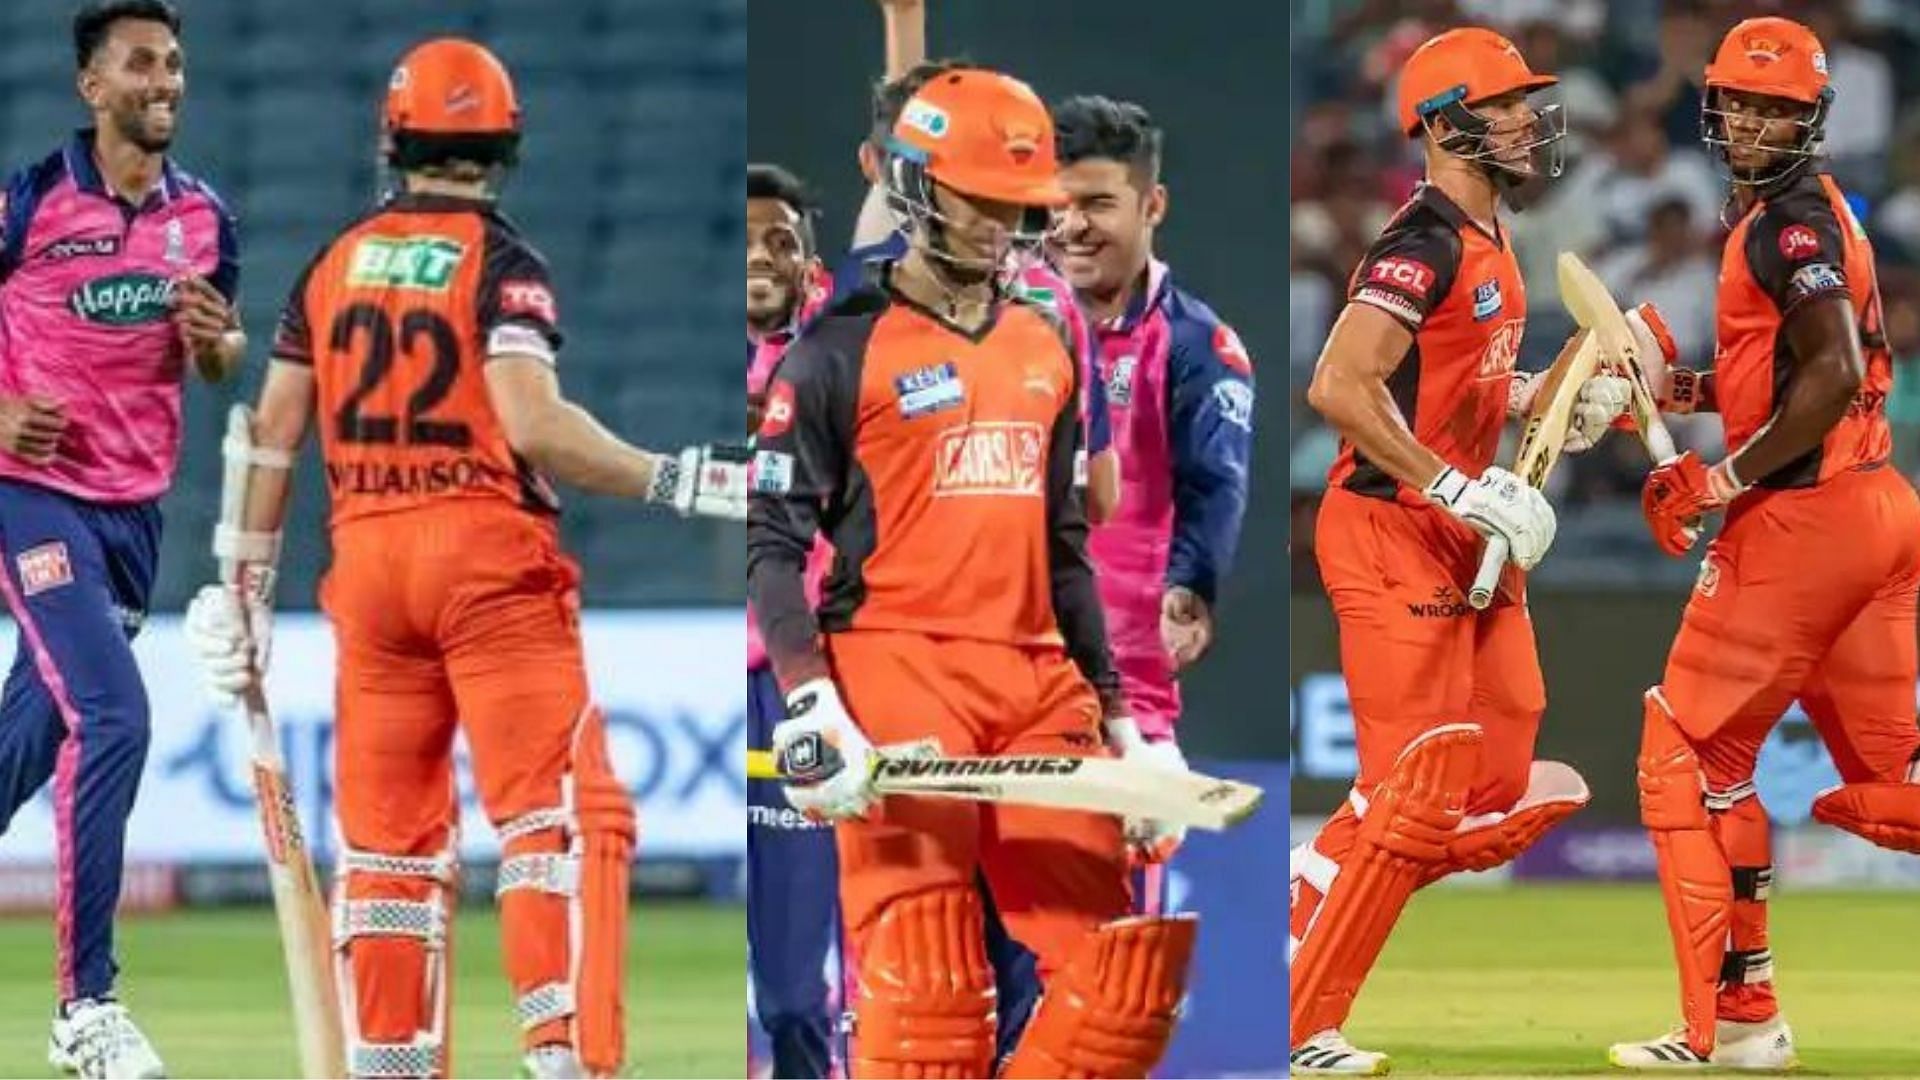 The SRH batting has failed to click in the first two games of IPL 2022 (P.C.:iplt20.com)